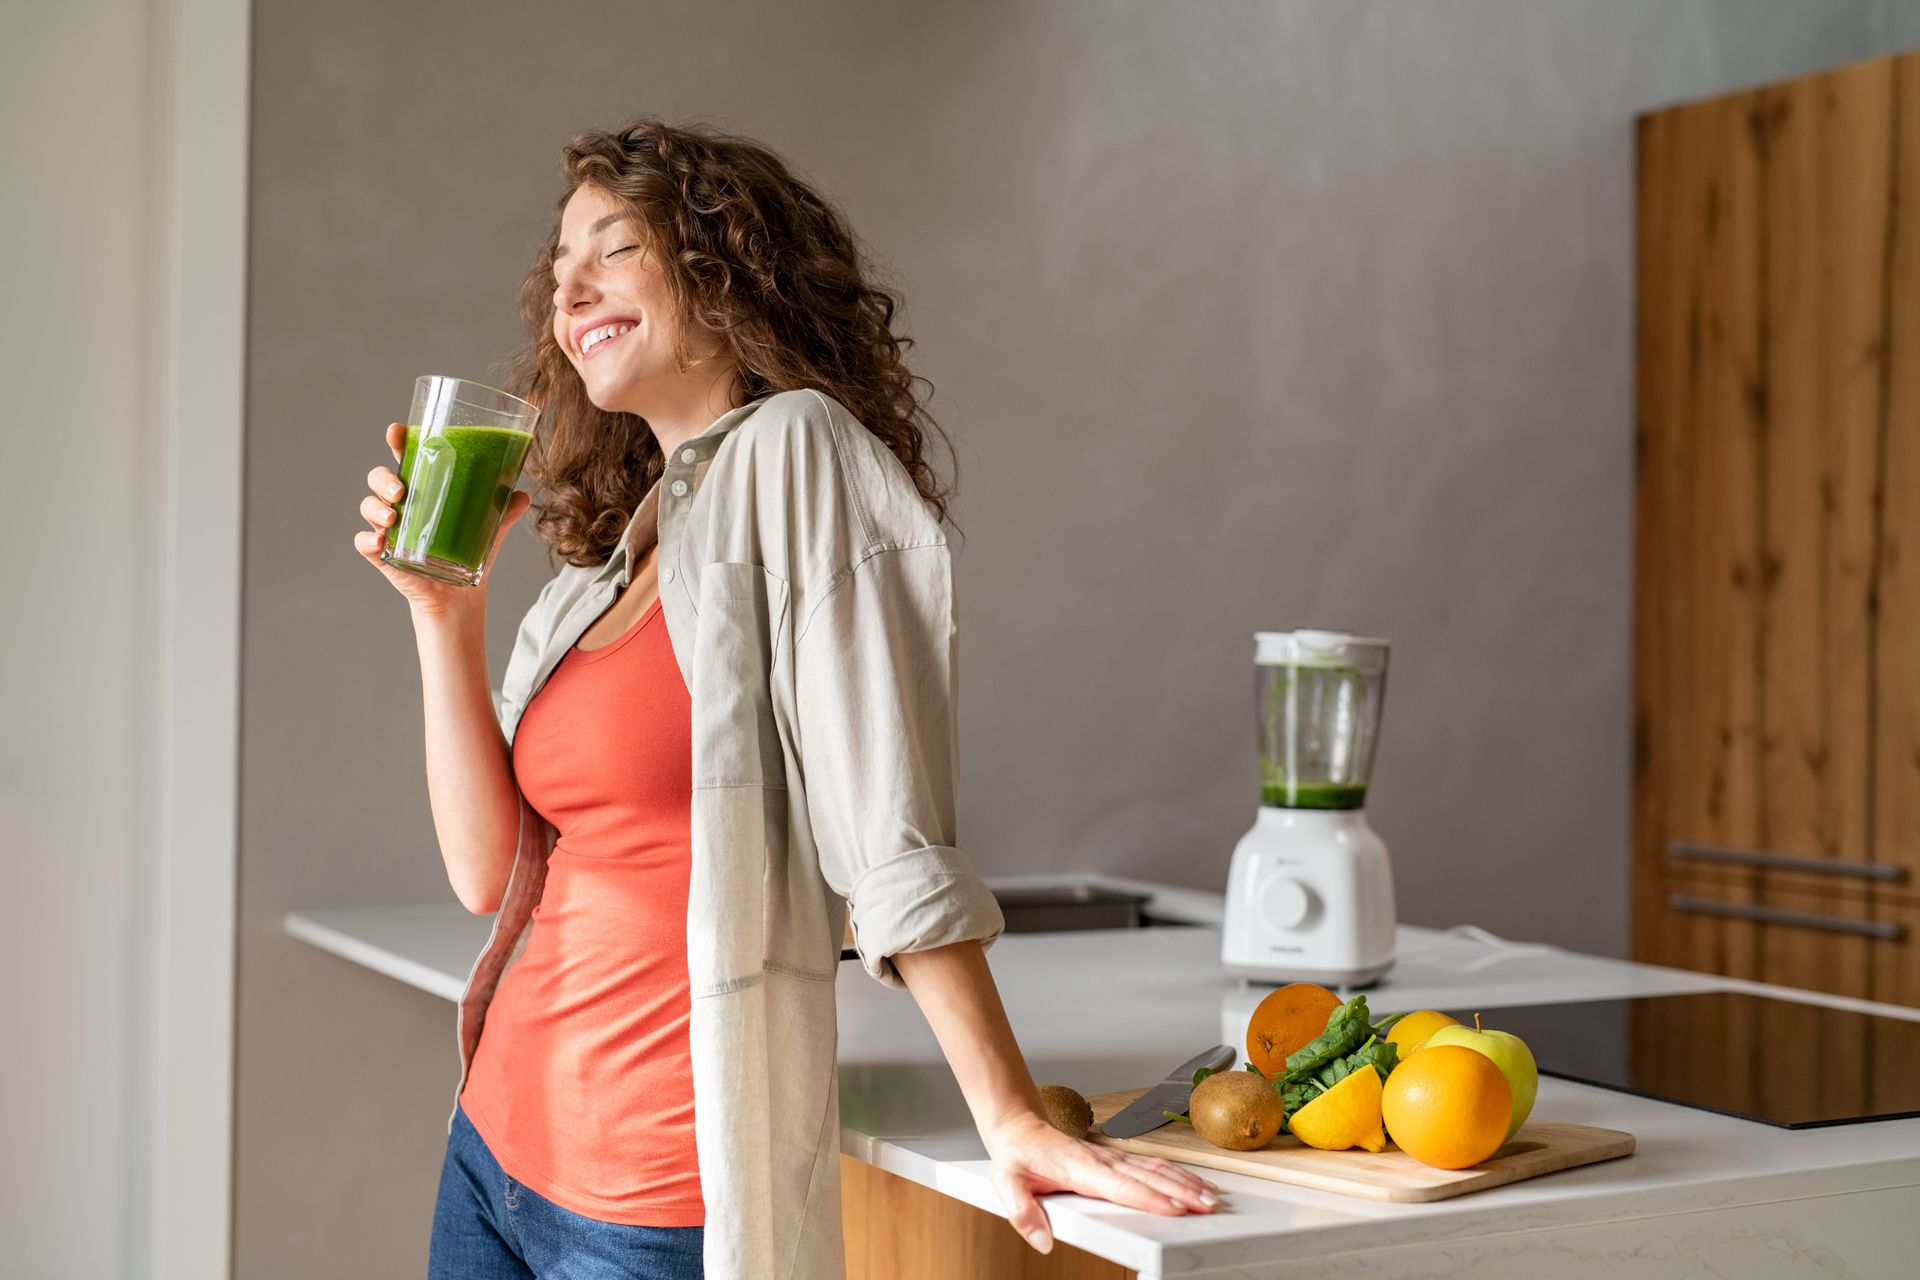 A pregnant woman is drinking a green smoothie in a kitchen